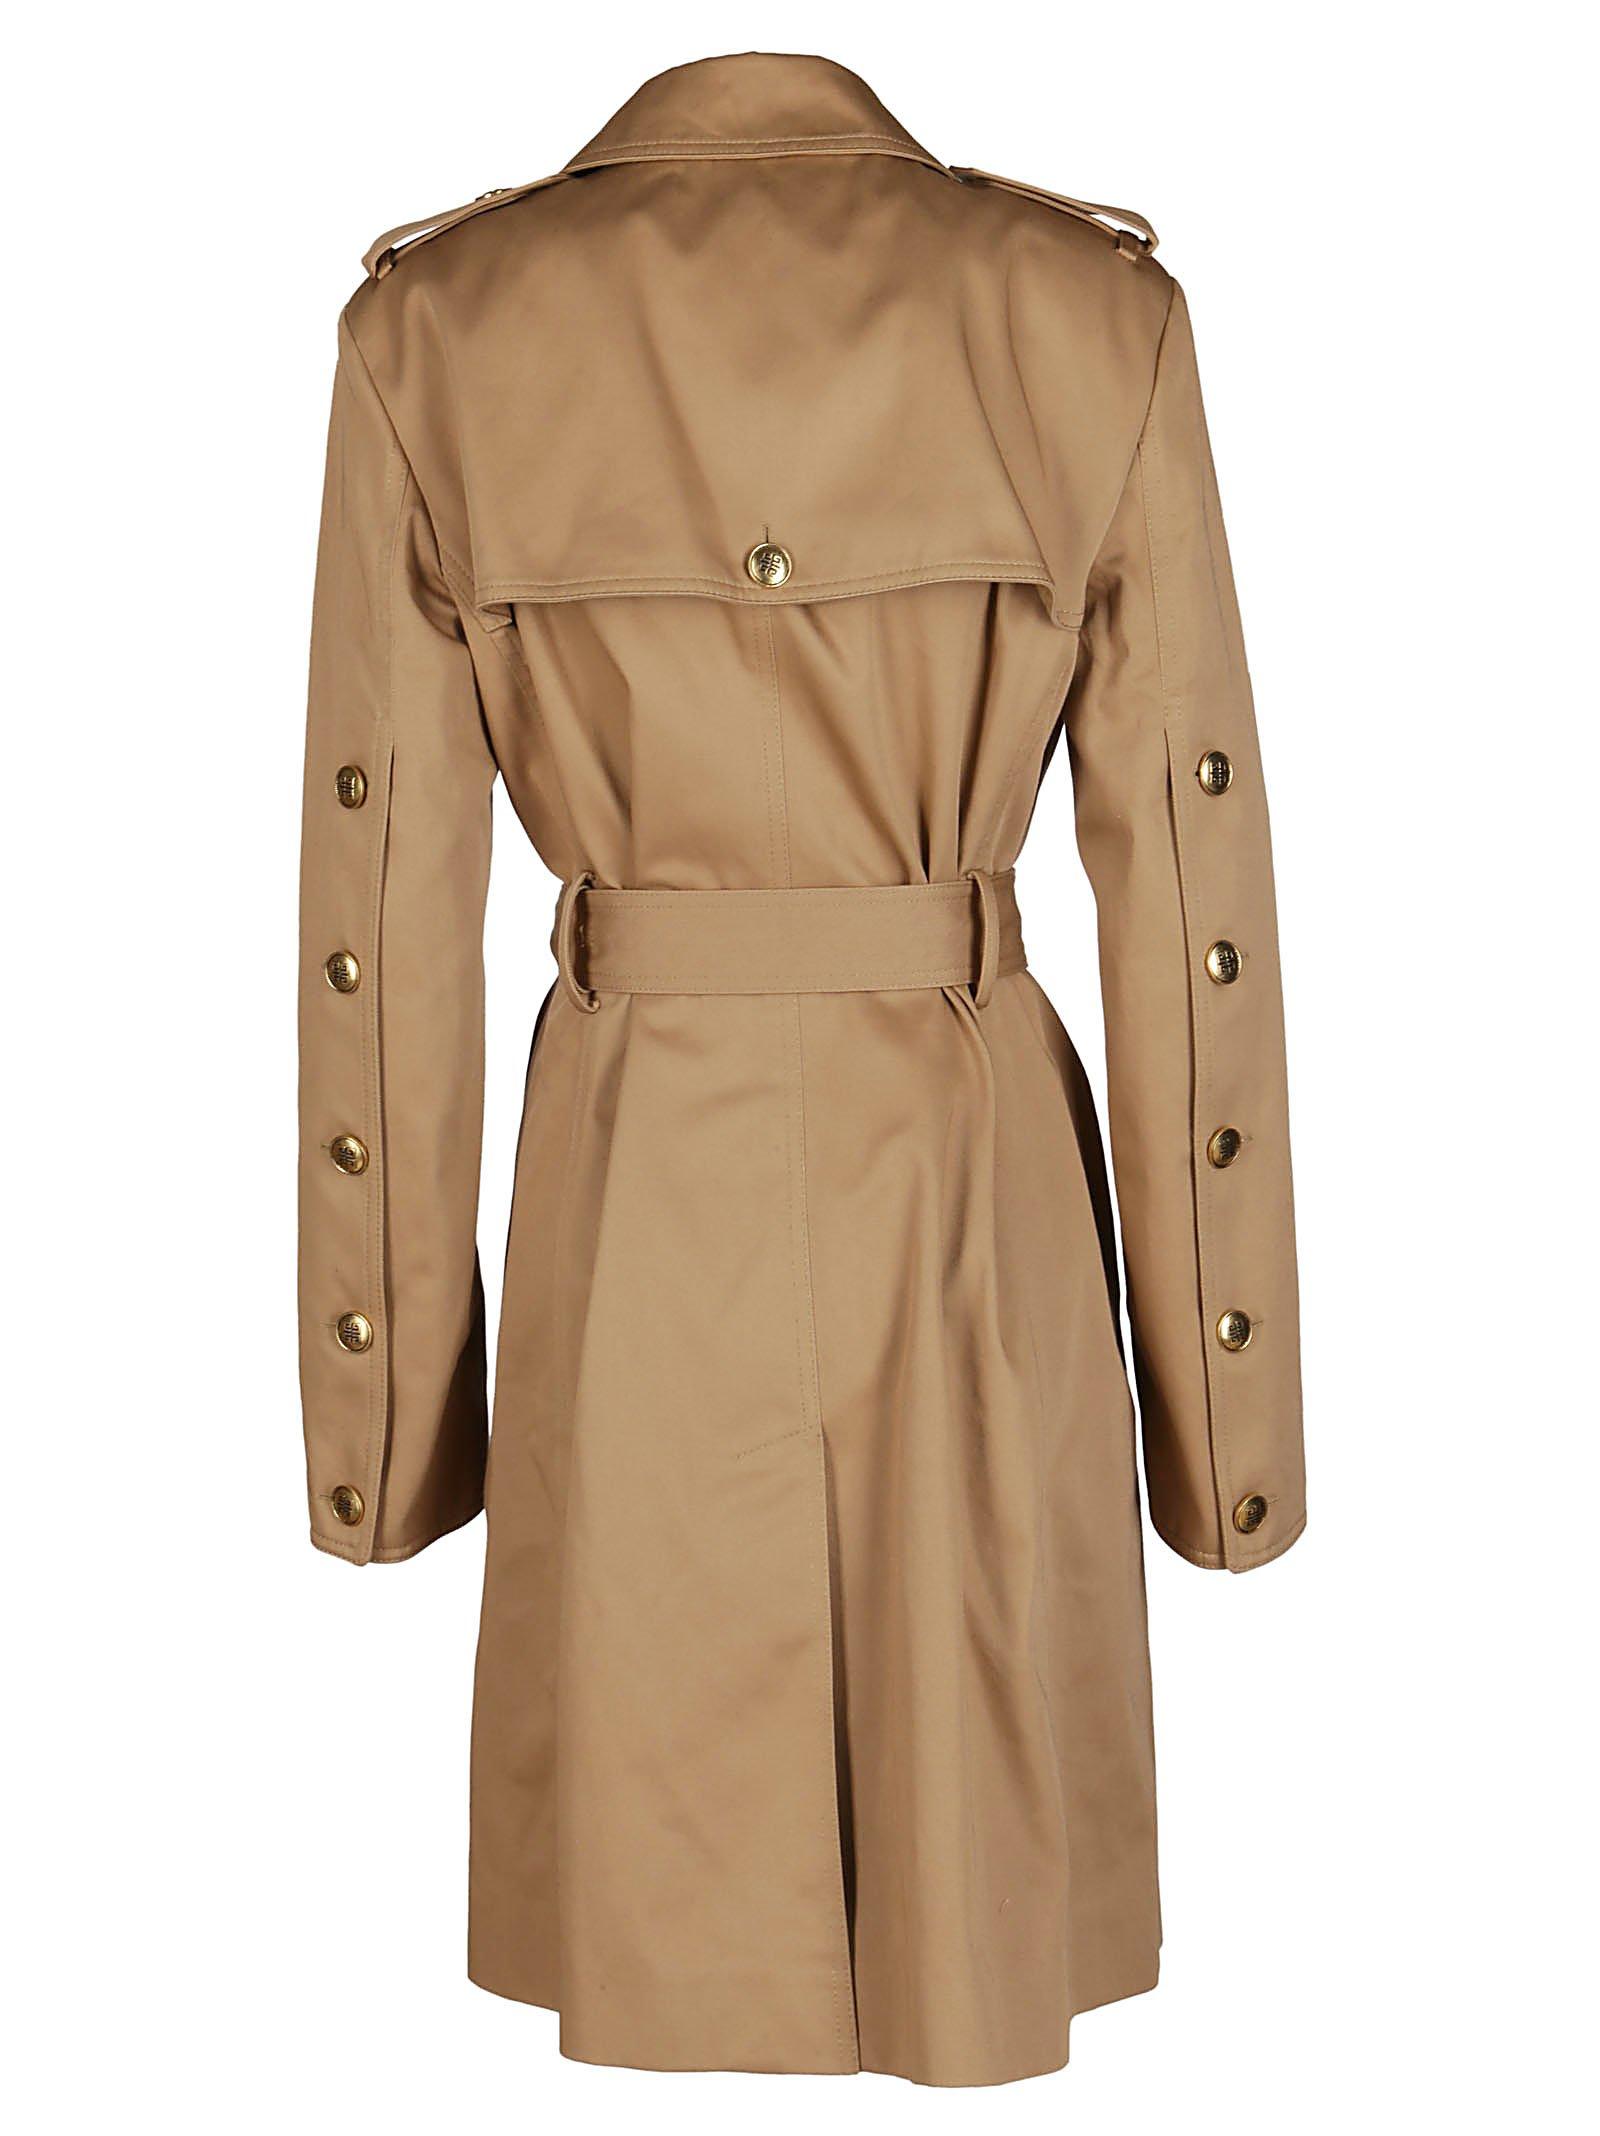 Givenchy Cotton Double-breasted Belted Trench Coat in Brown - Lyst